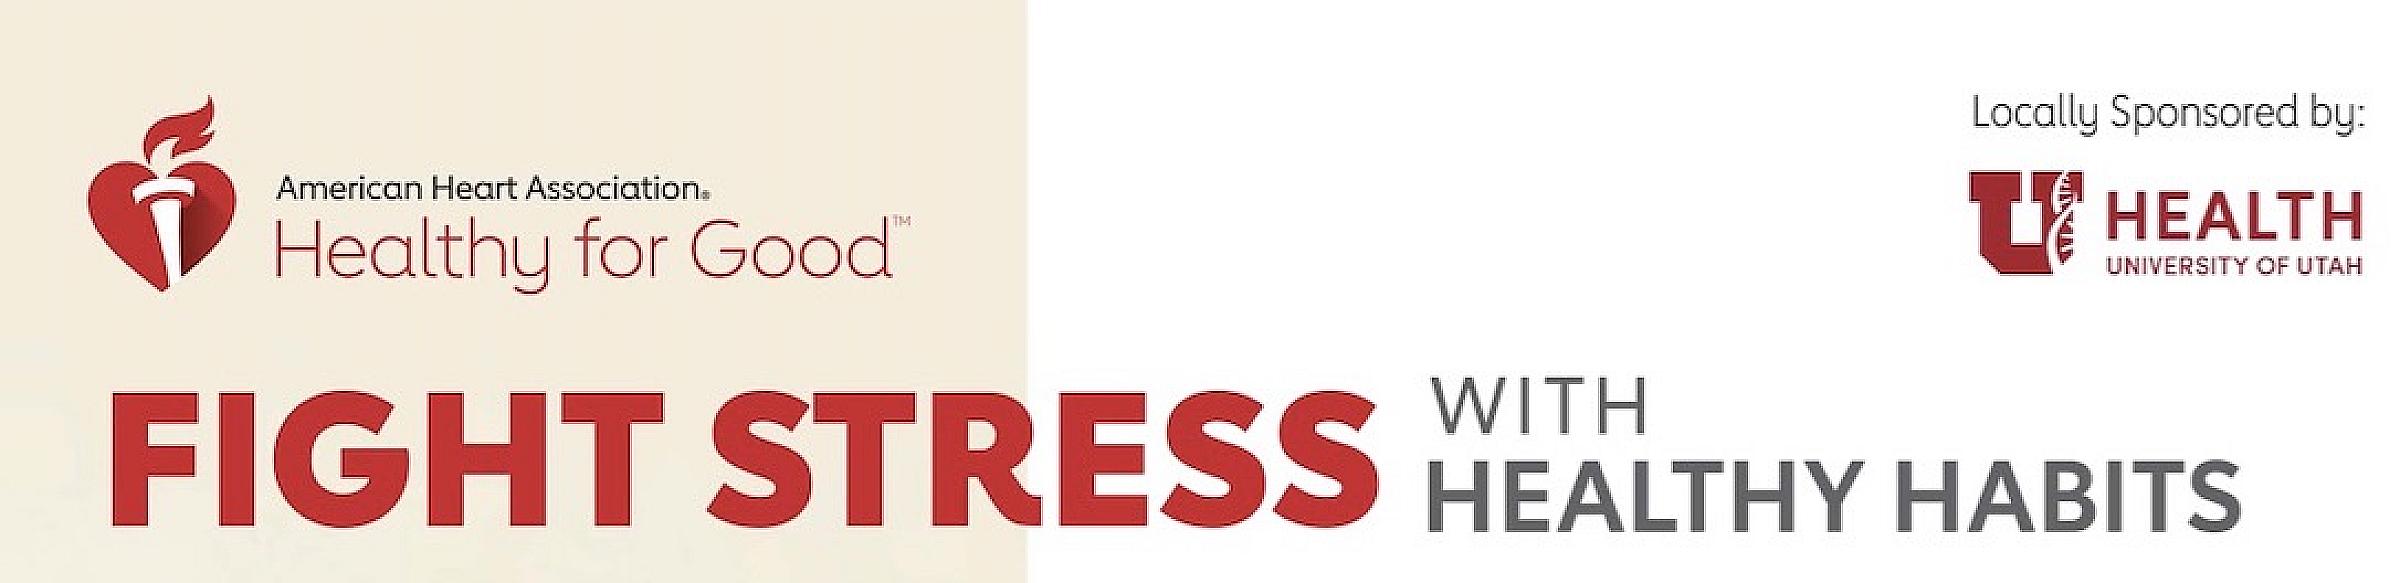 Fight stress with health habits banner